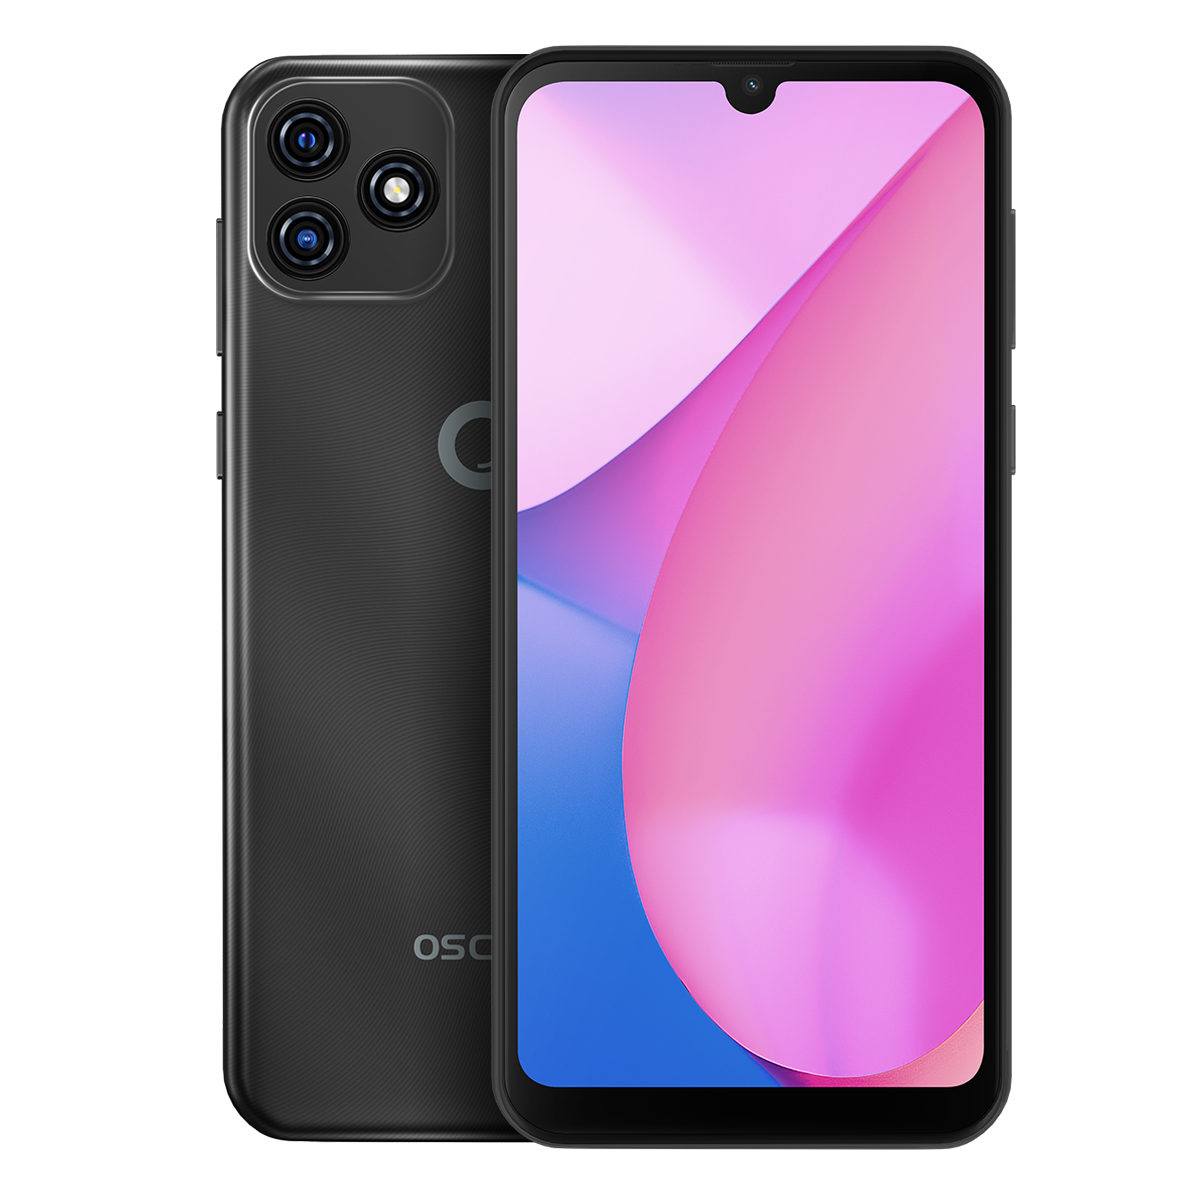 Find Blackview Oscal C20 Pro Global Version 2GB 32GB 6.088 inch Android 11 Unisoc Octa-core 4G Smartphone for Sale on Gipsybee.com with cryptocurrencies